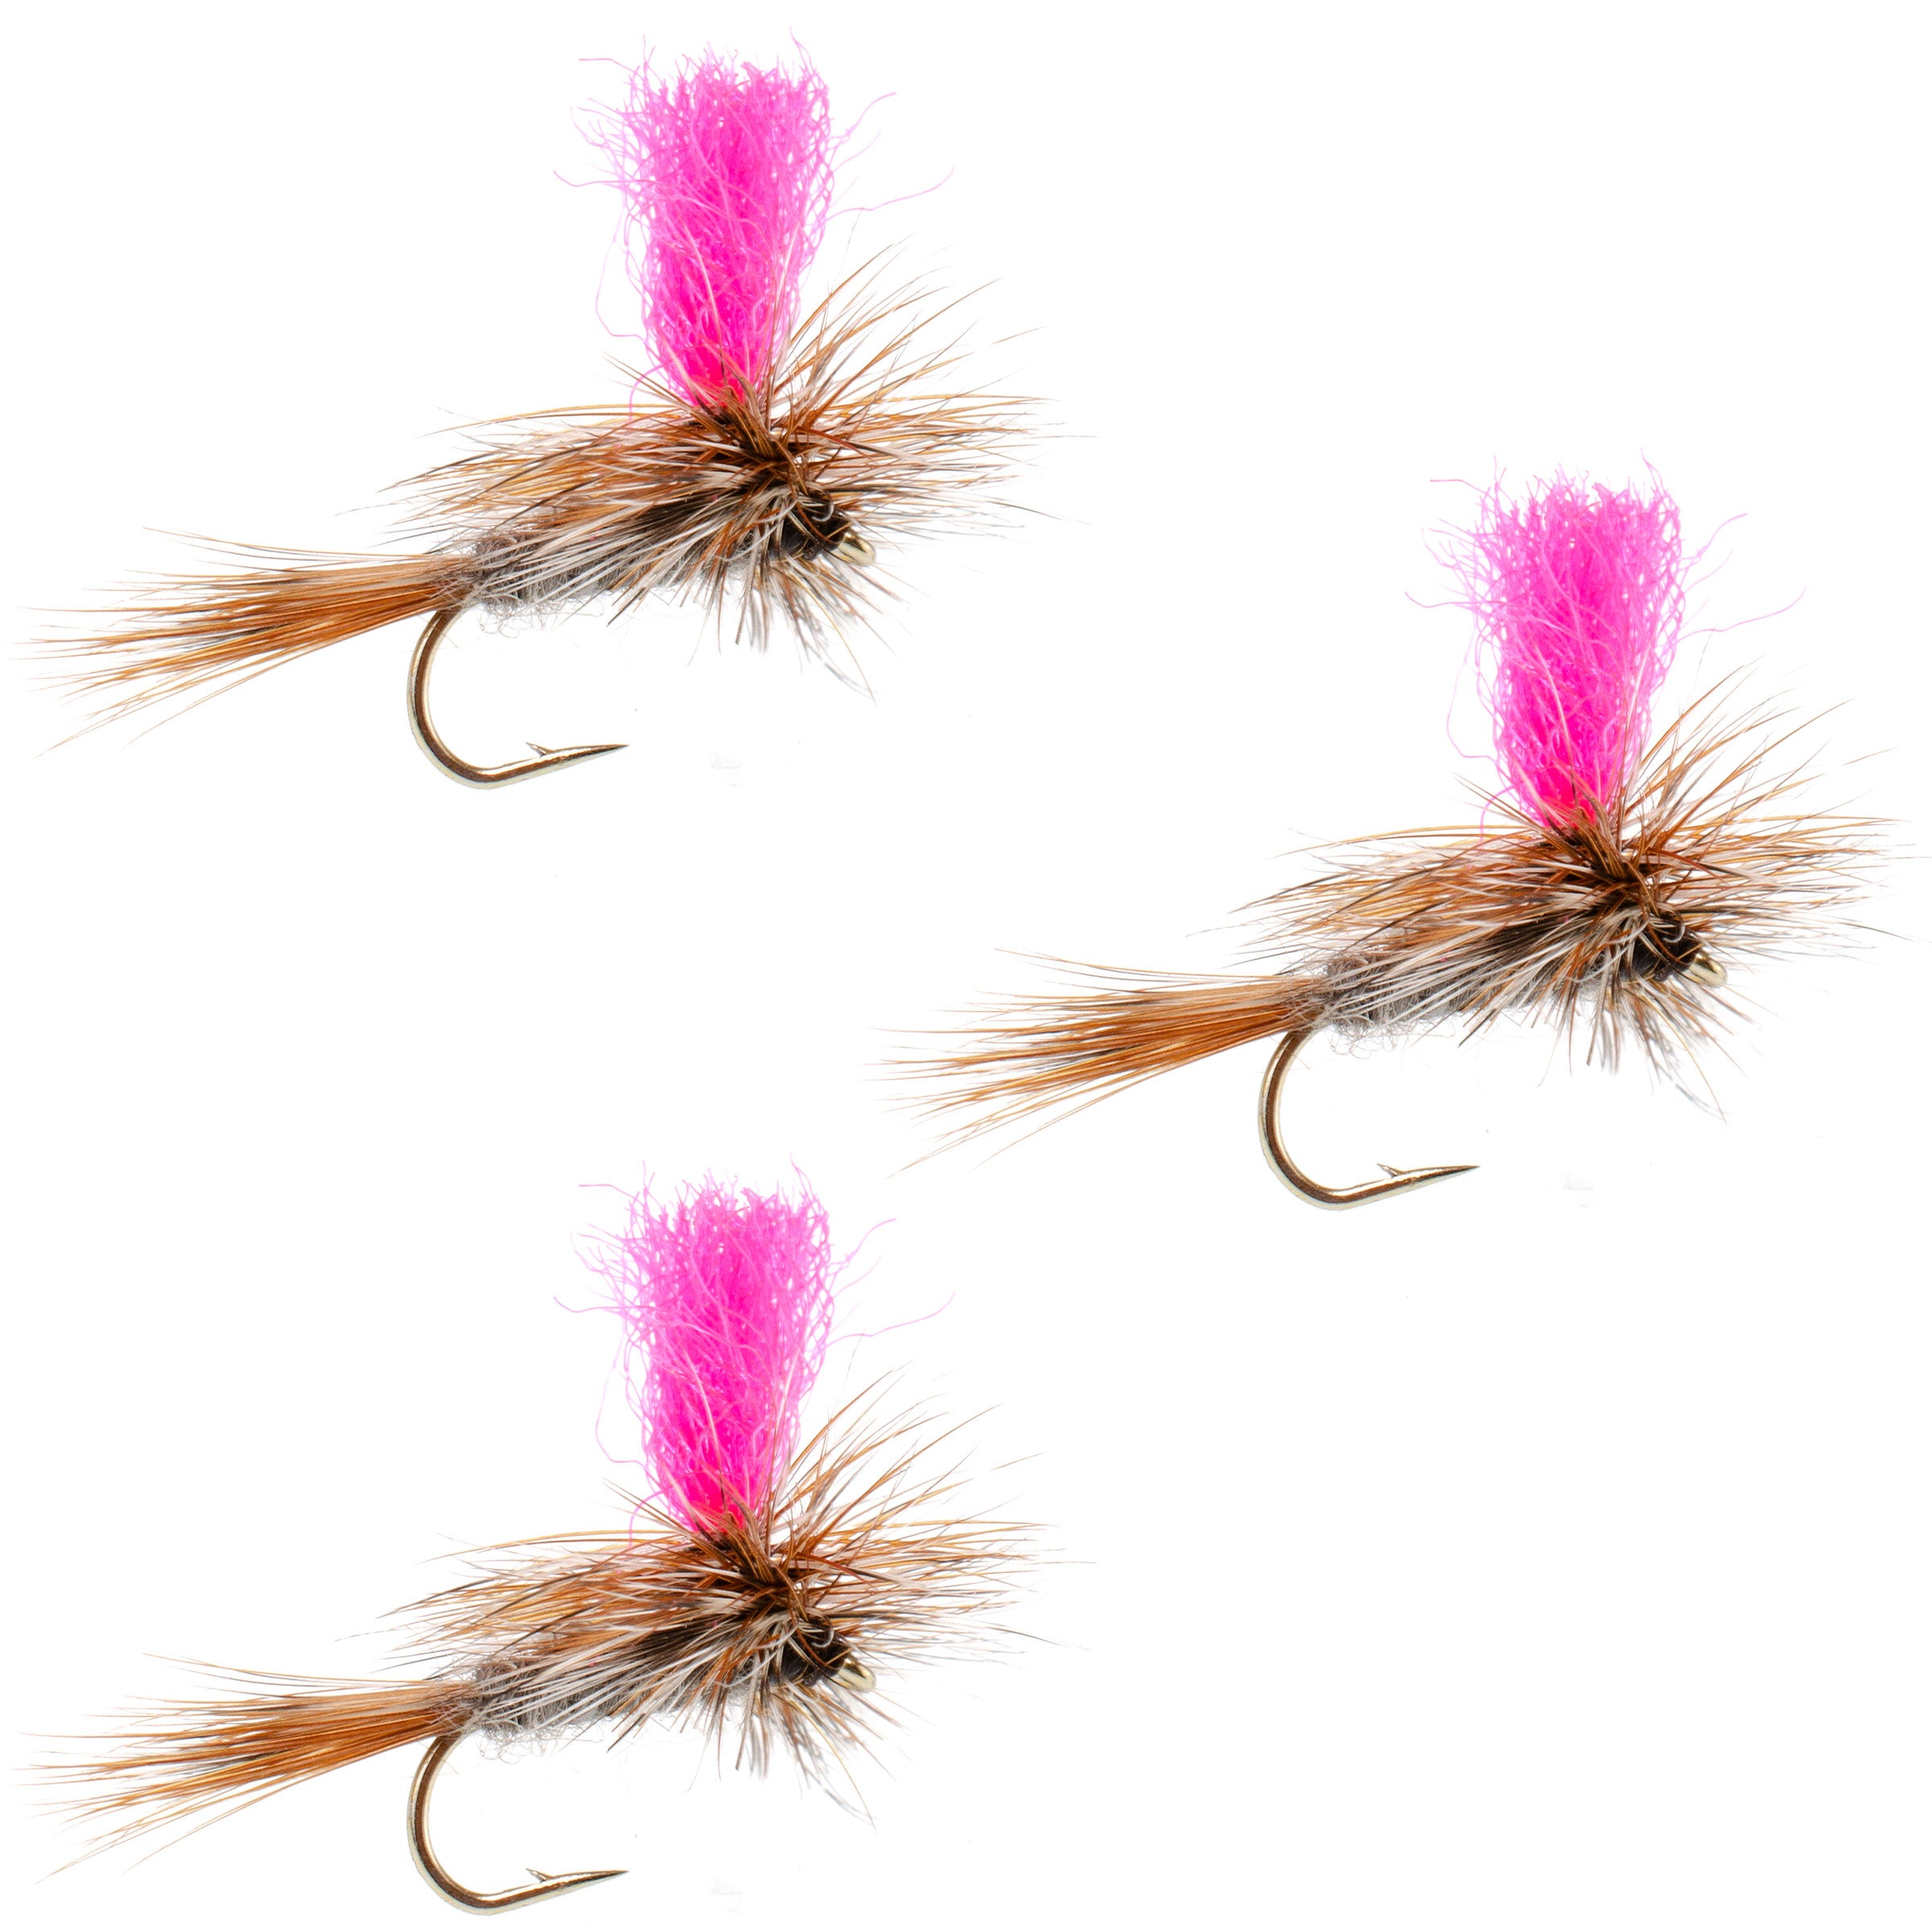  The Fly Fishing Place Hippie Stomper Black Green Foam Body  Trout Bass Dry Fly Fishing Flies - Set of 4 Hook Size 14 : Sports & Outdoors